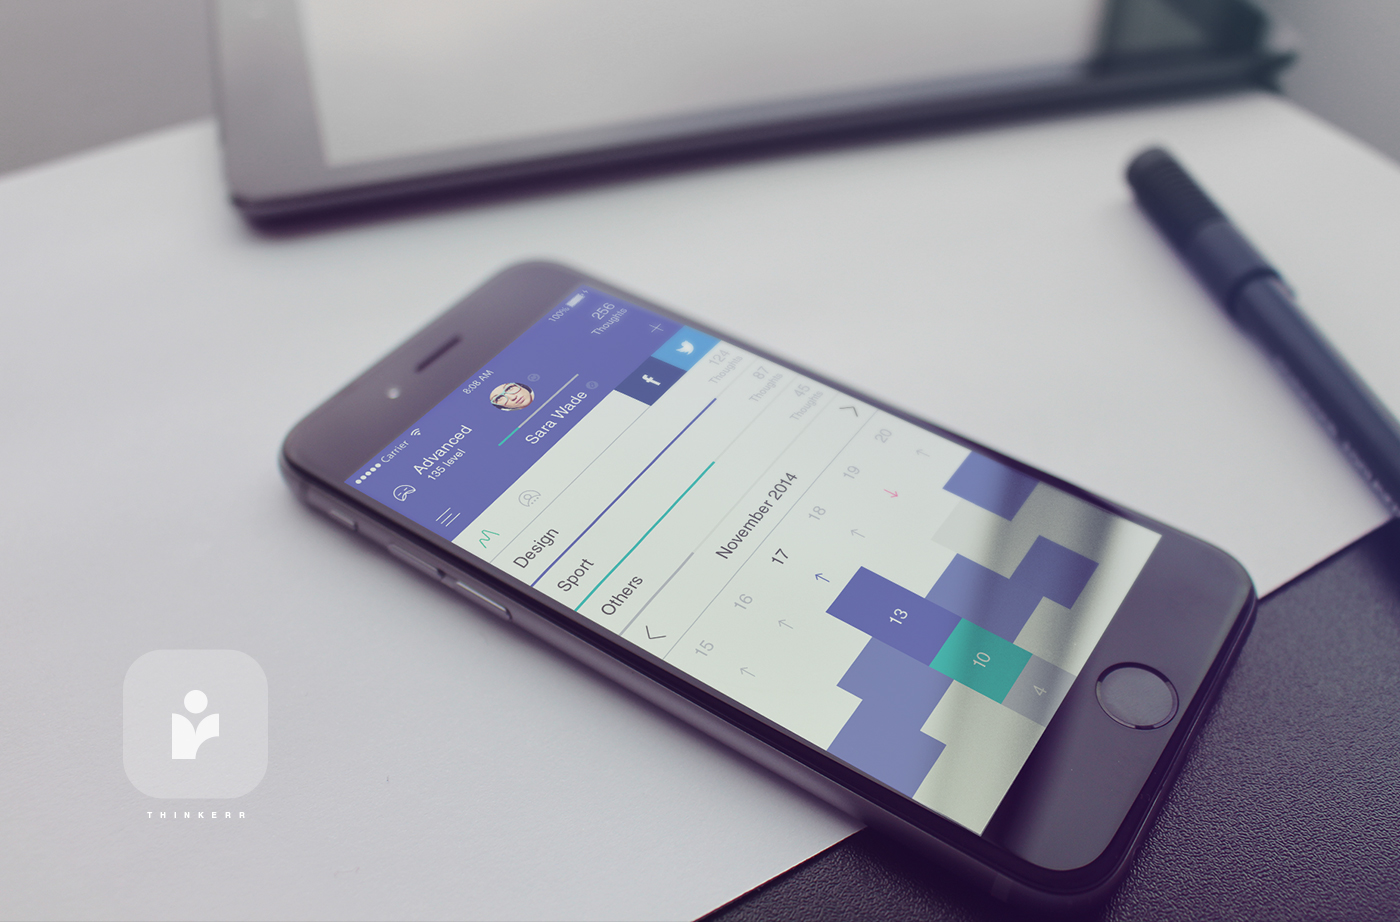 Thinkerr people app iphone iPhone6 mockups application social facebook twitter share thought emotions ideas